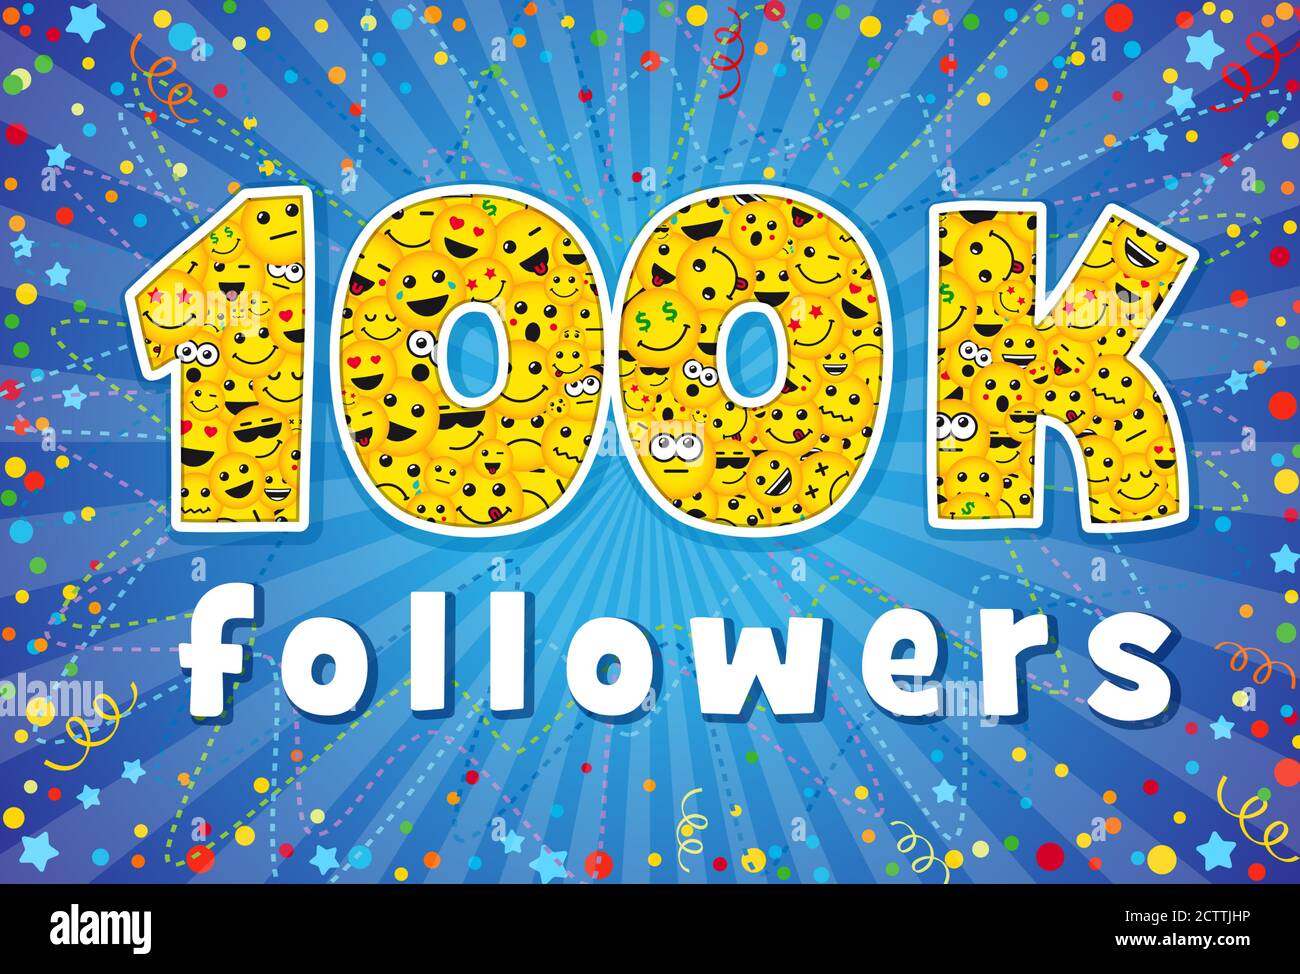 Thank you 100 000 followers creative concept. Bright festive thanks for 100.000 networking likes. 100k subscribes sign with people faces. Funny yellow Stock Vector